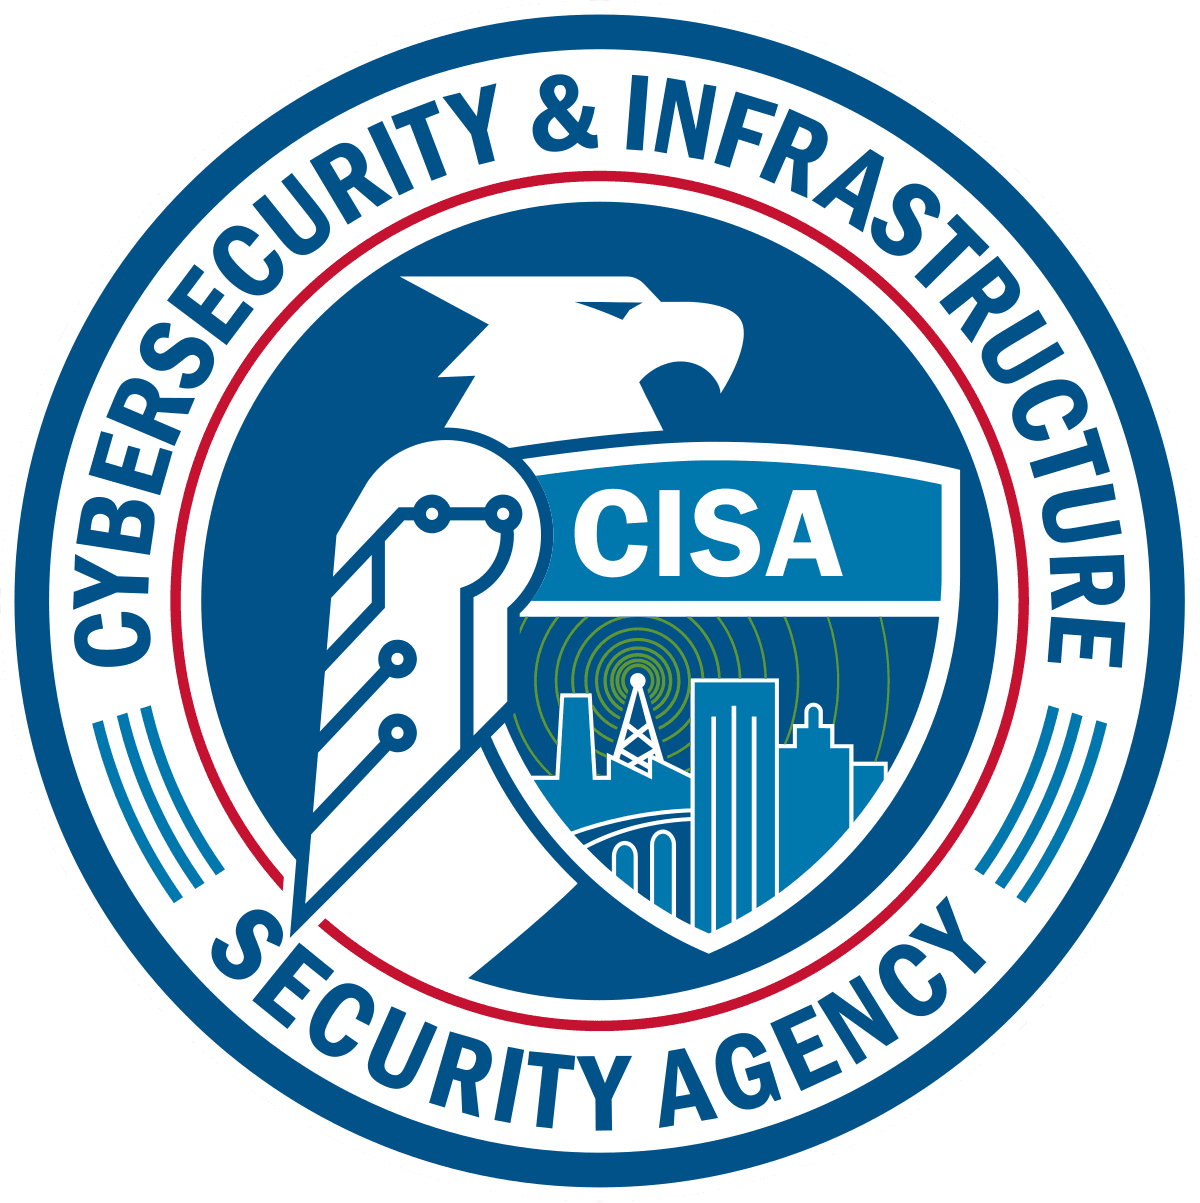 Cybersecurity & infrastructure security agency logo